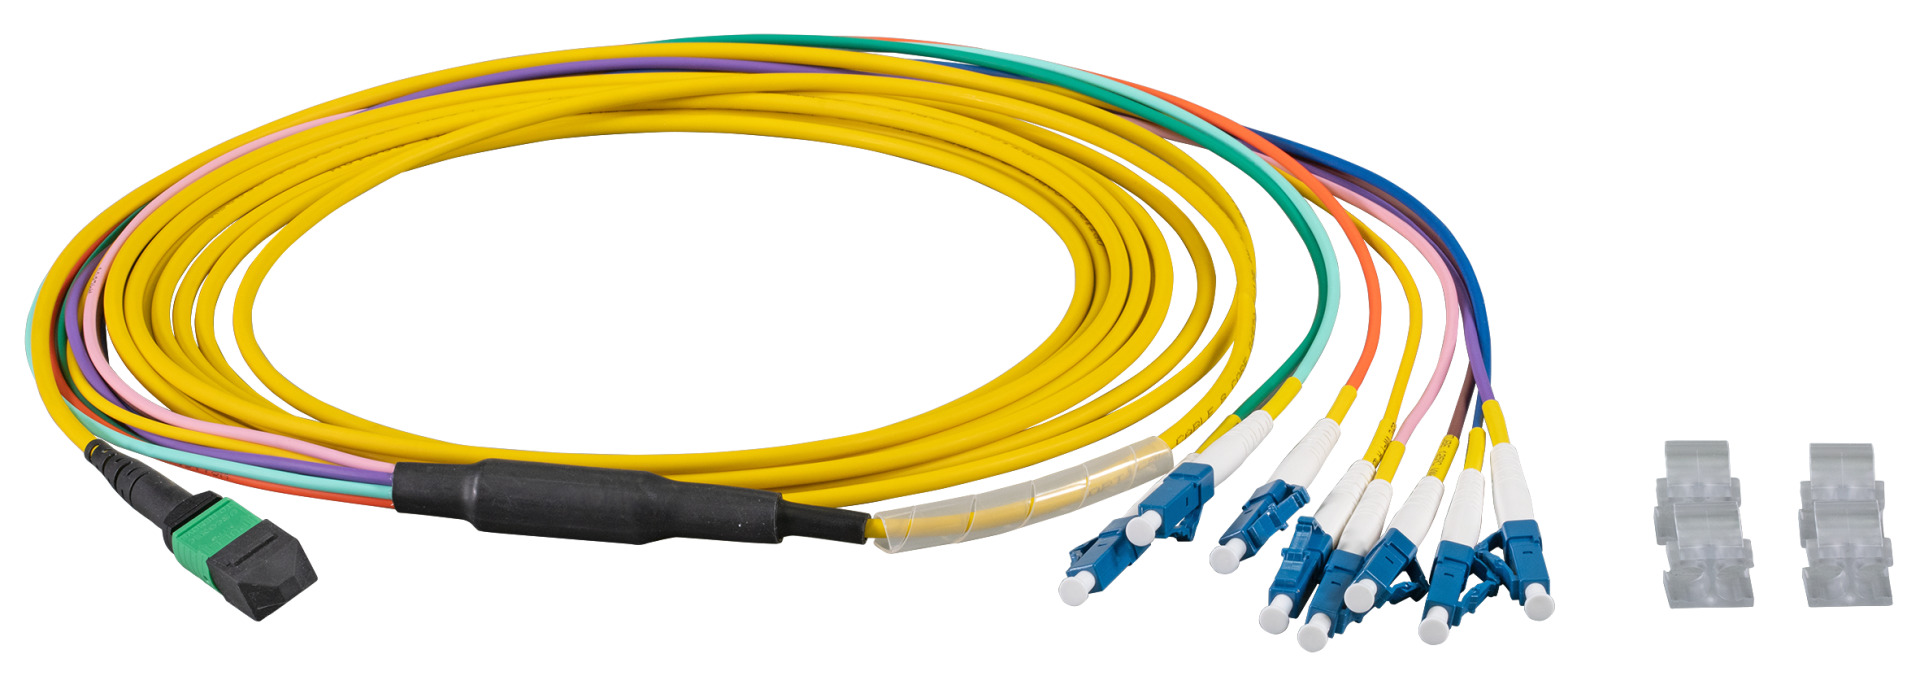 MTP®-F/LC 8-fiber patch cable OS2, LSZH yellow, 1m